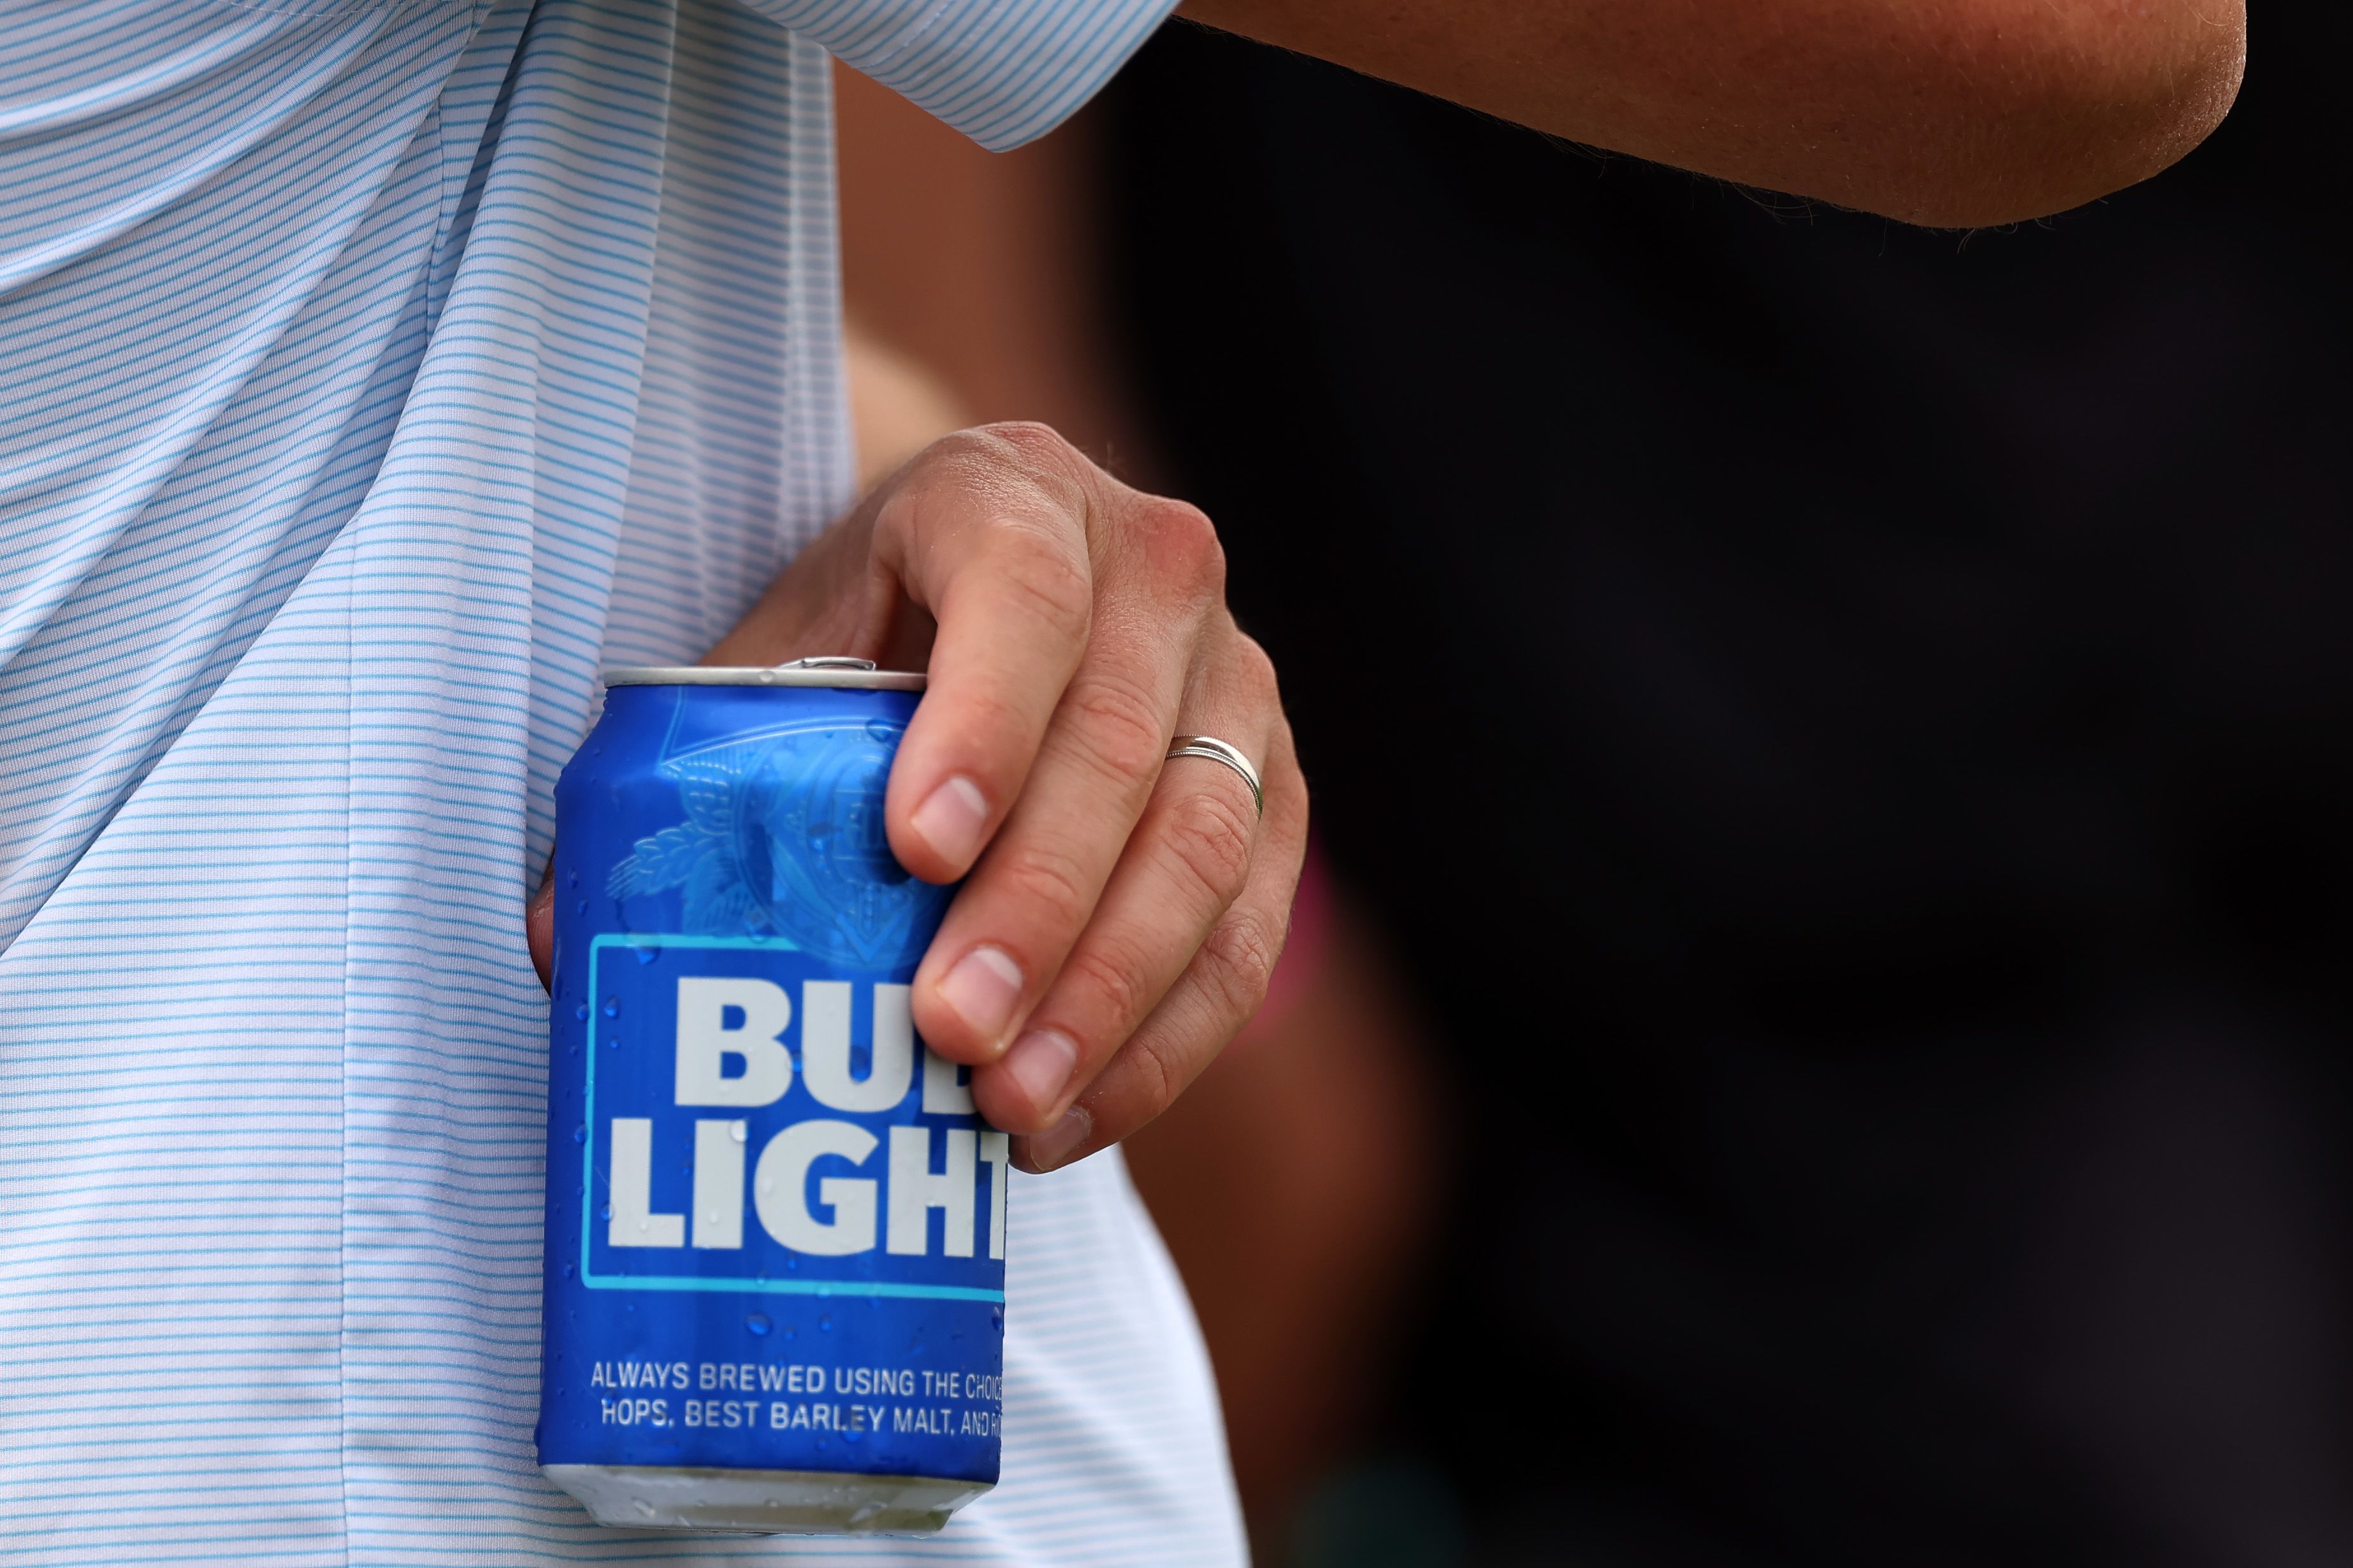 Bud Light is 'coming back' but controversy is an 'important wake-up call,'  Anheuser-Busch exec says